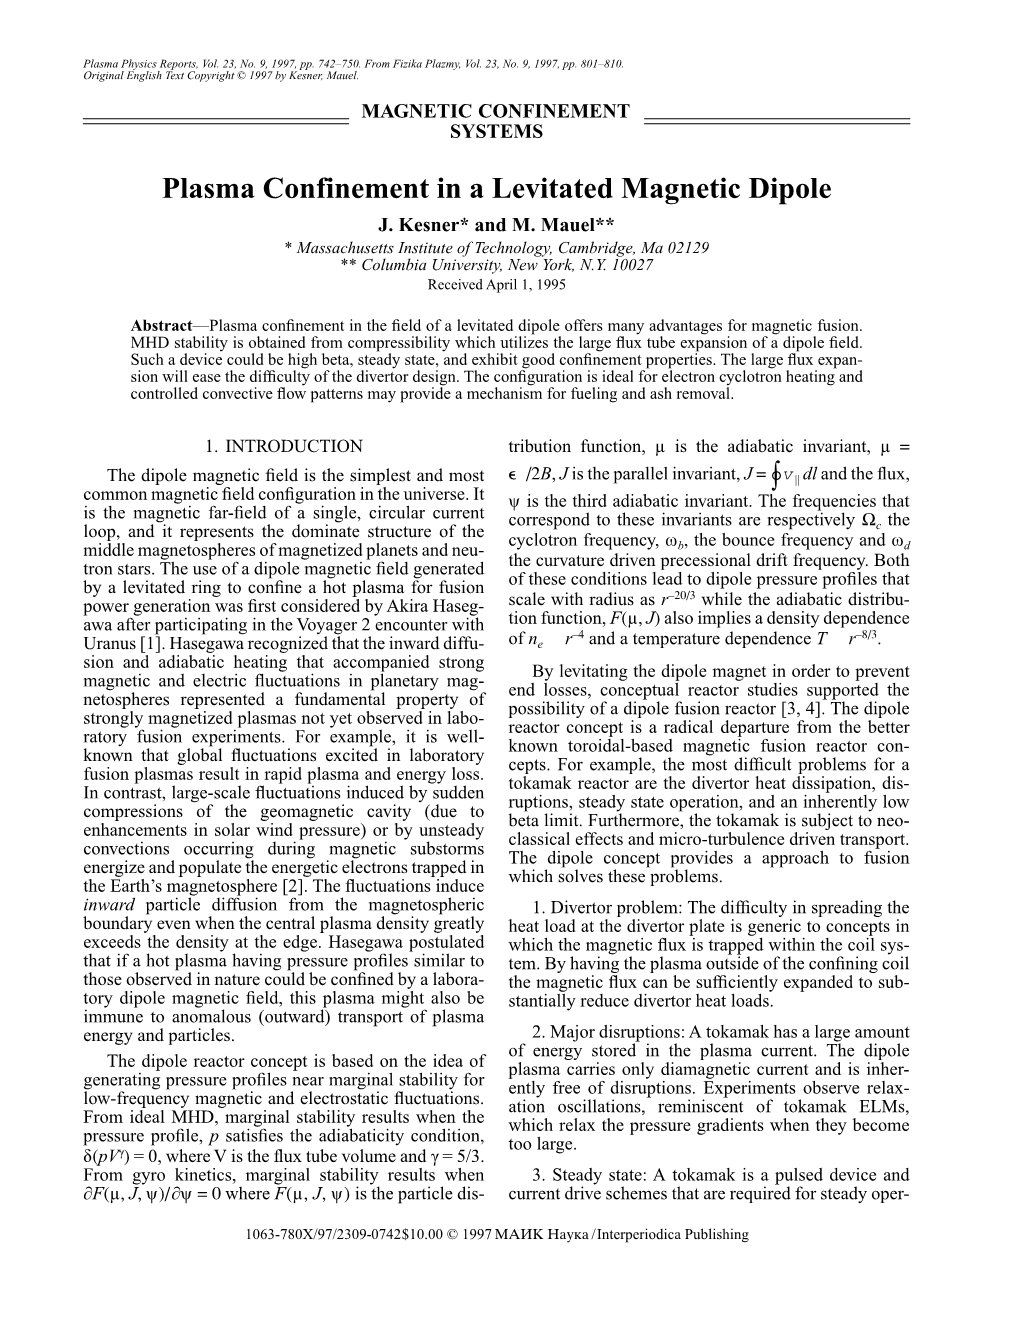 ∫° Plasma Confinement in a Levitated Magnetic Dipole